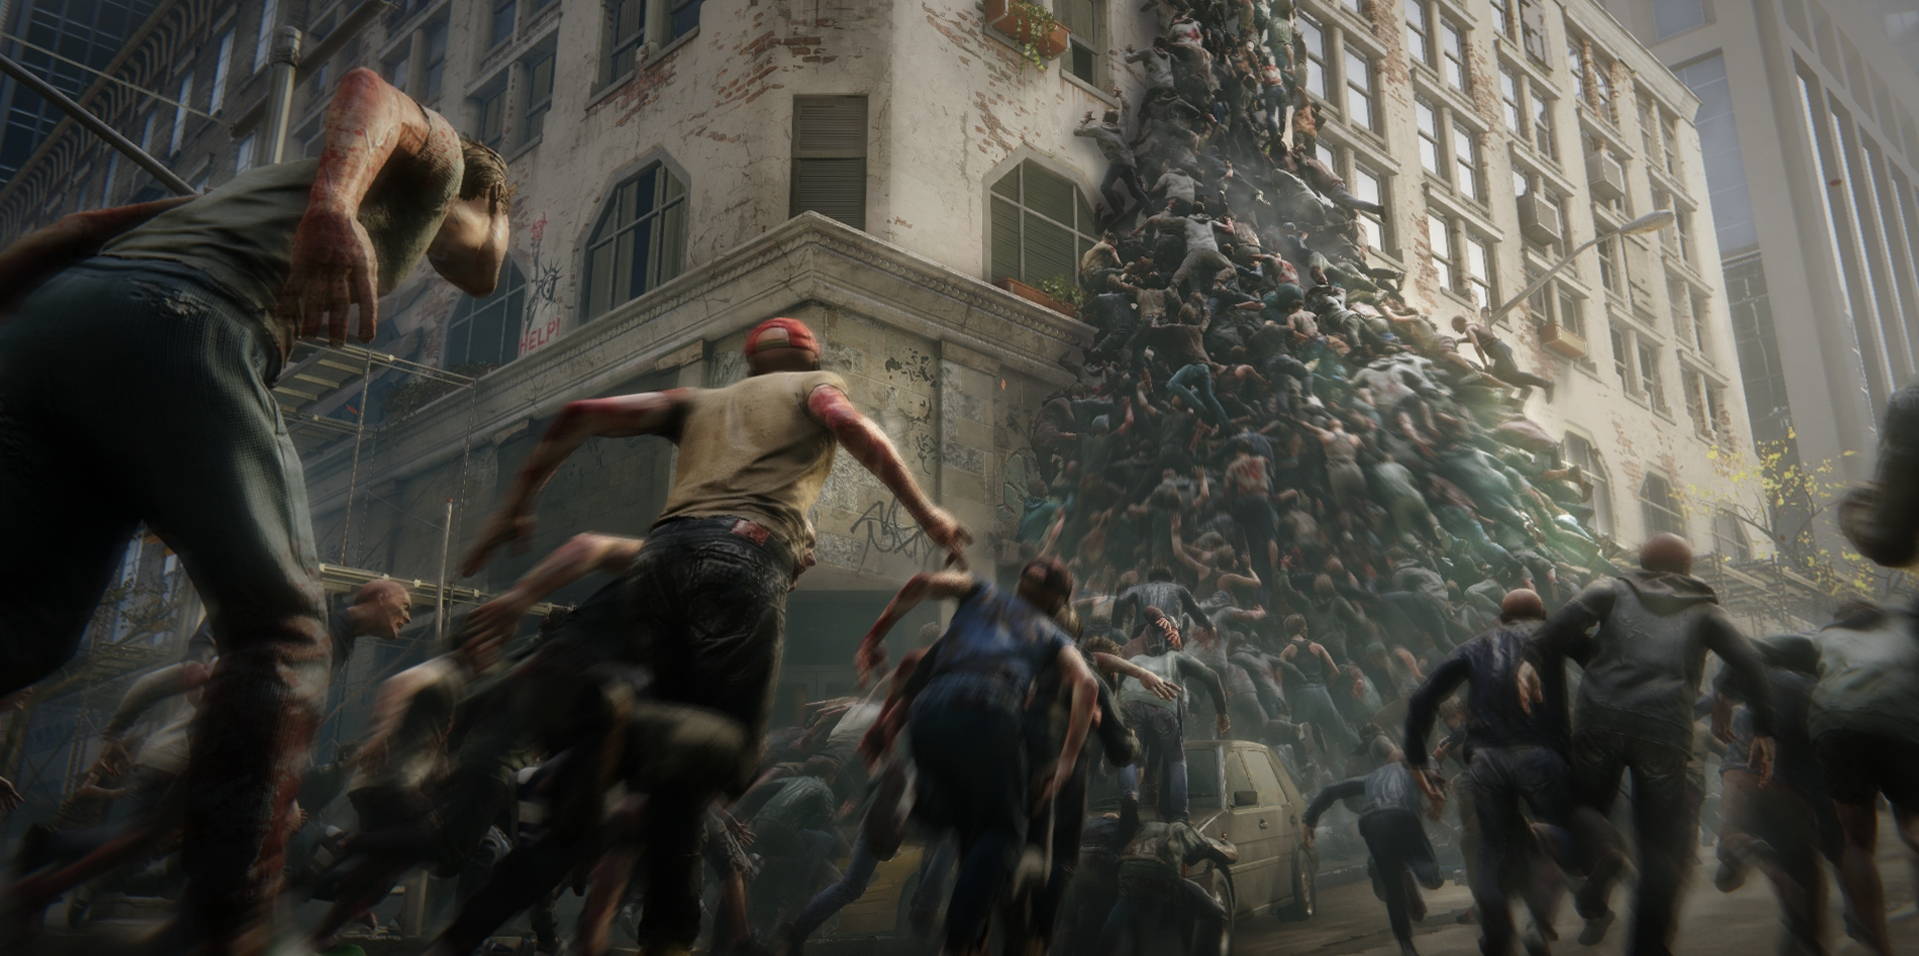 World War Z’s New Trailer Has Revealed The PvPvZ Multiplayer Mode And It’s Just A Week Of Waiting